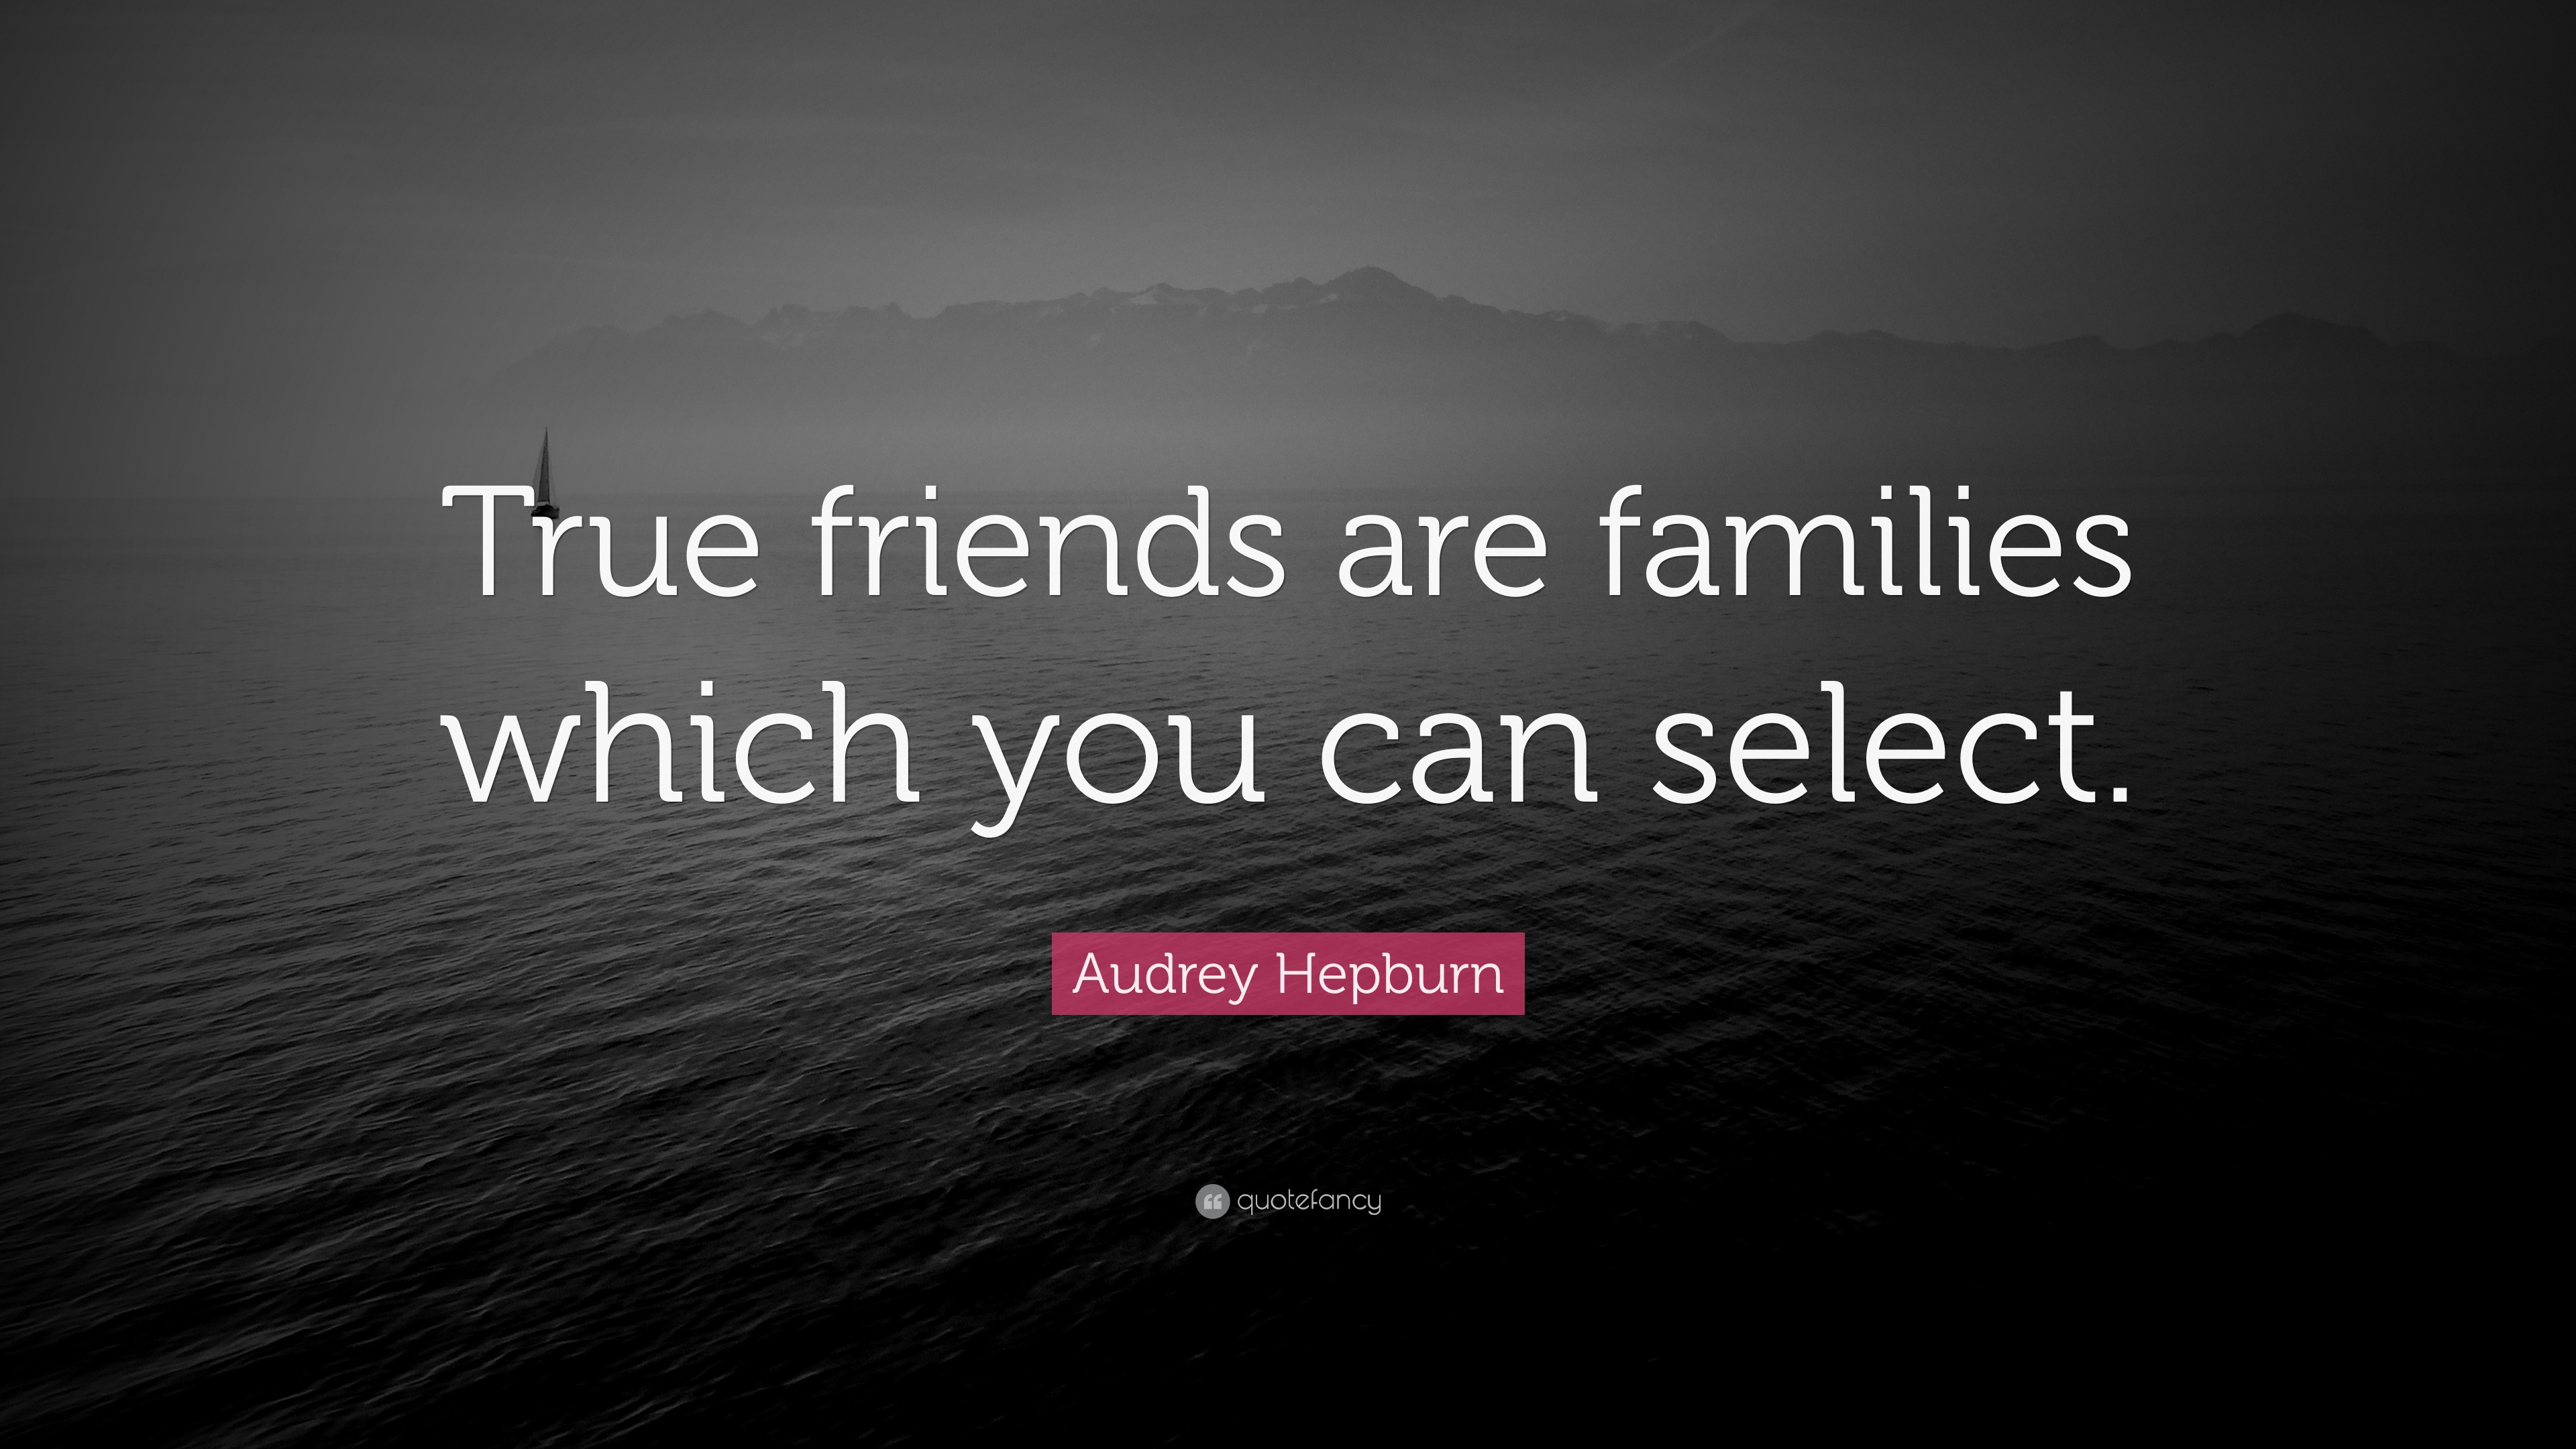 Audrey Hepburn Quote   True  friends  are families which you 